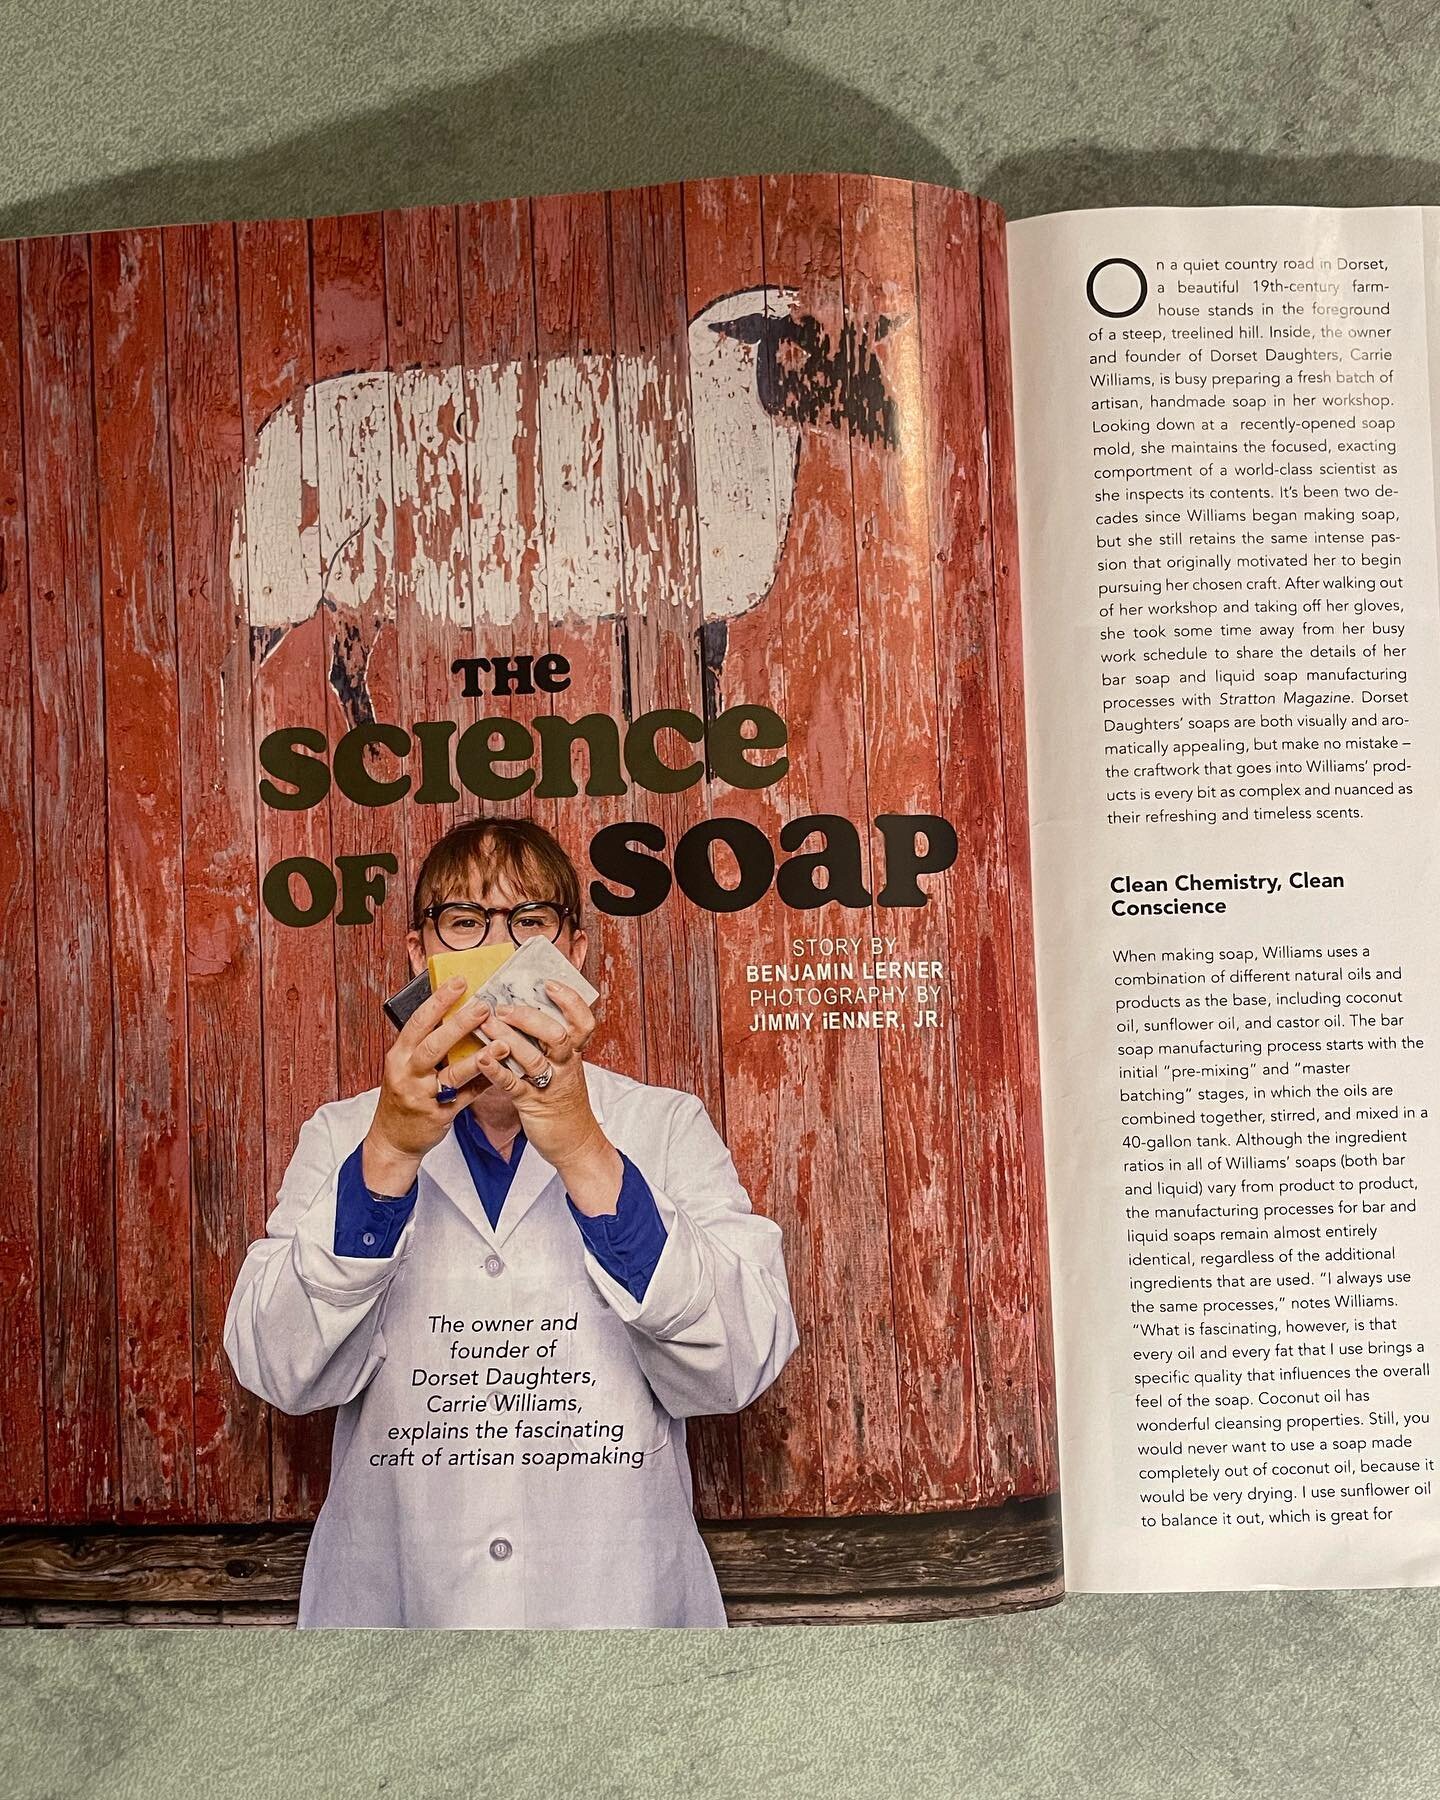 We are so thrilled to see such an in depth article about our process and story written by Benjamin Lerner, with photos by Jimmy iEnner, Jr., in the current holiday edition of Stratton Magazine.  Thanks for helping to tell our story!  And, thanks for 